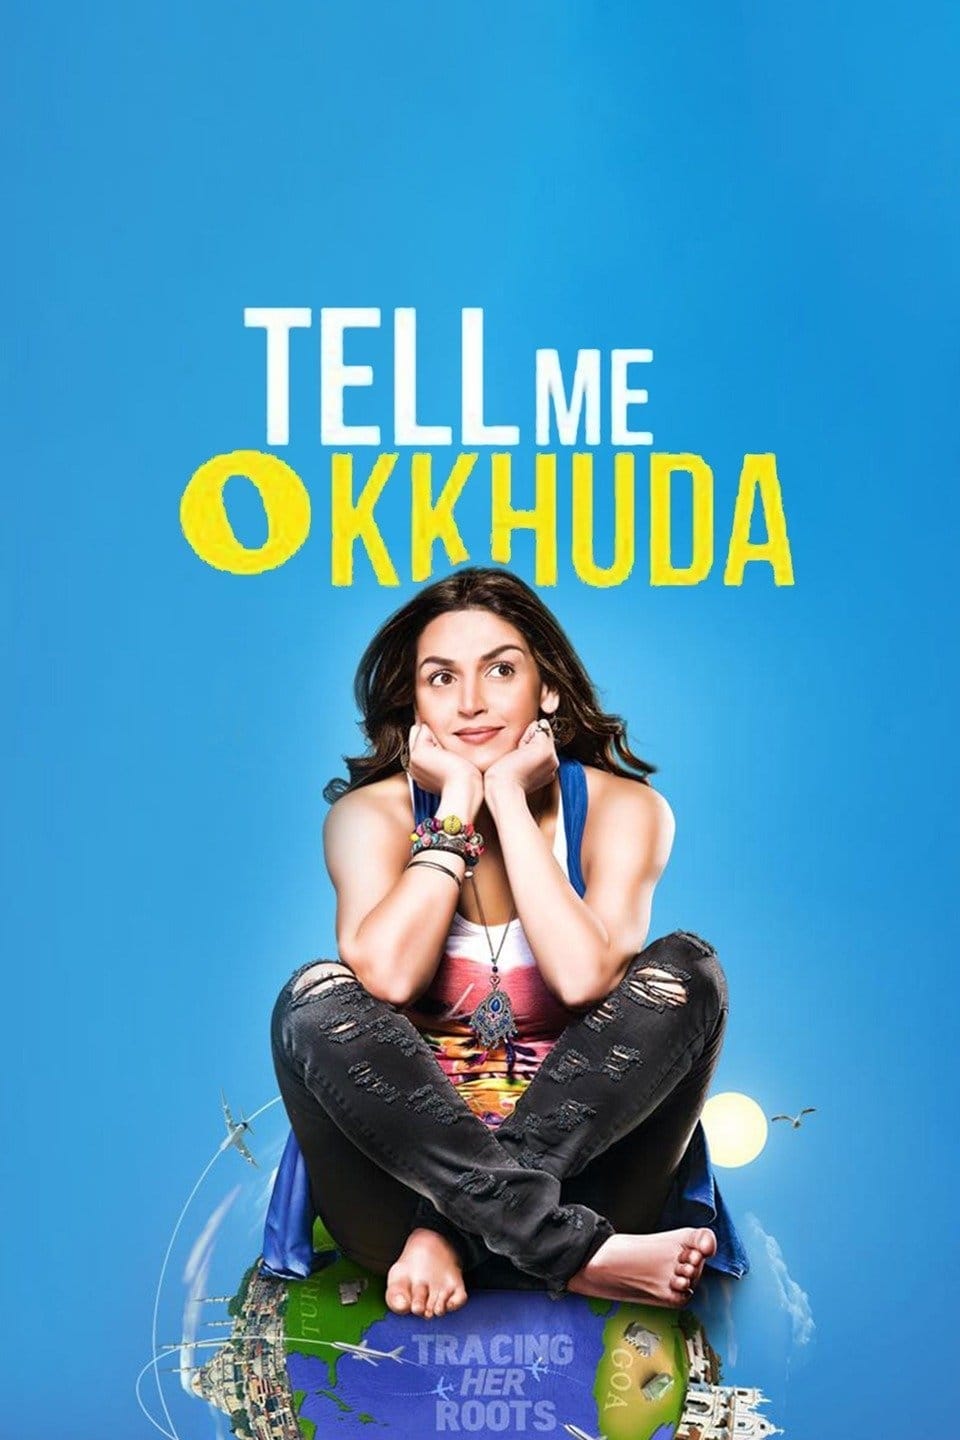 Poster for the movie "Tell Me O Kkhuda"